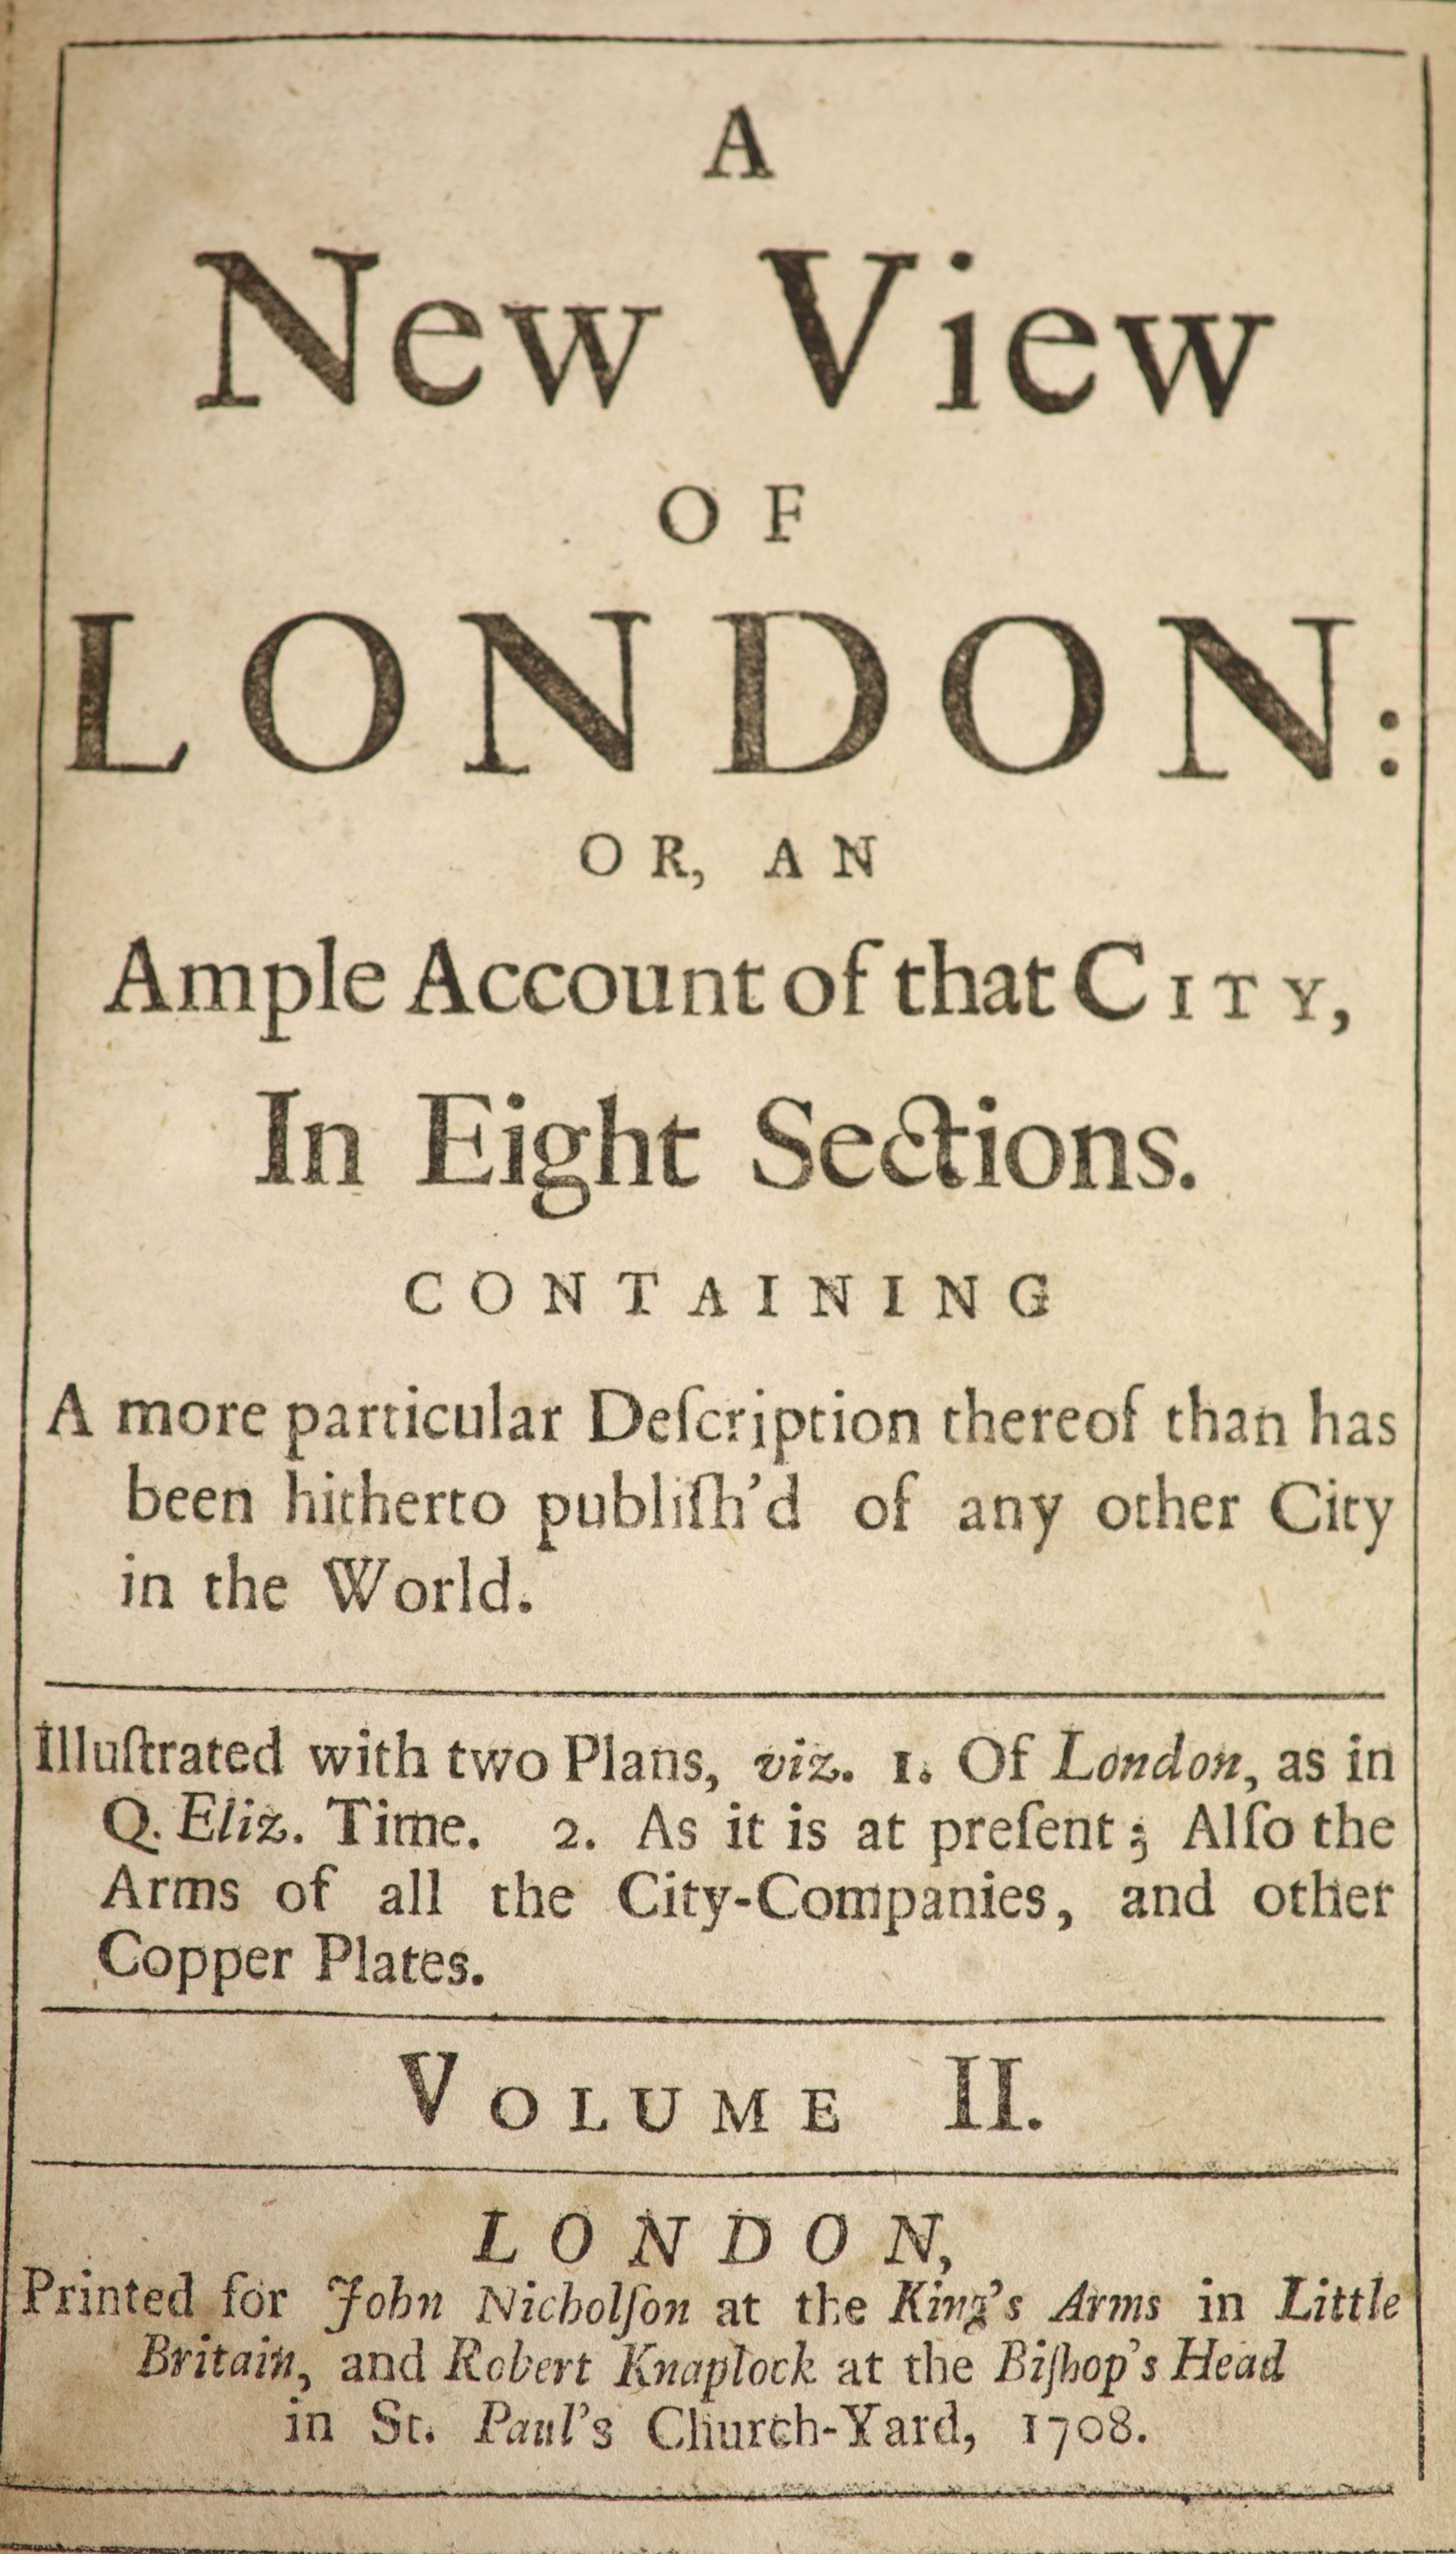 [Hatton, Edward] A New View of London: or, an Ample Account of that City...